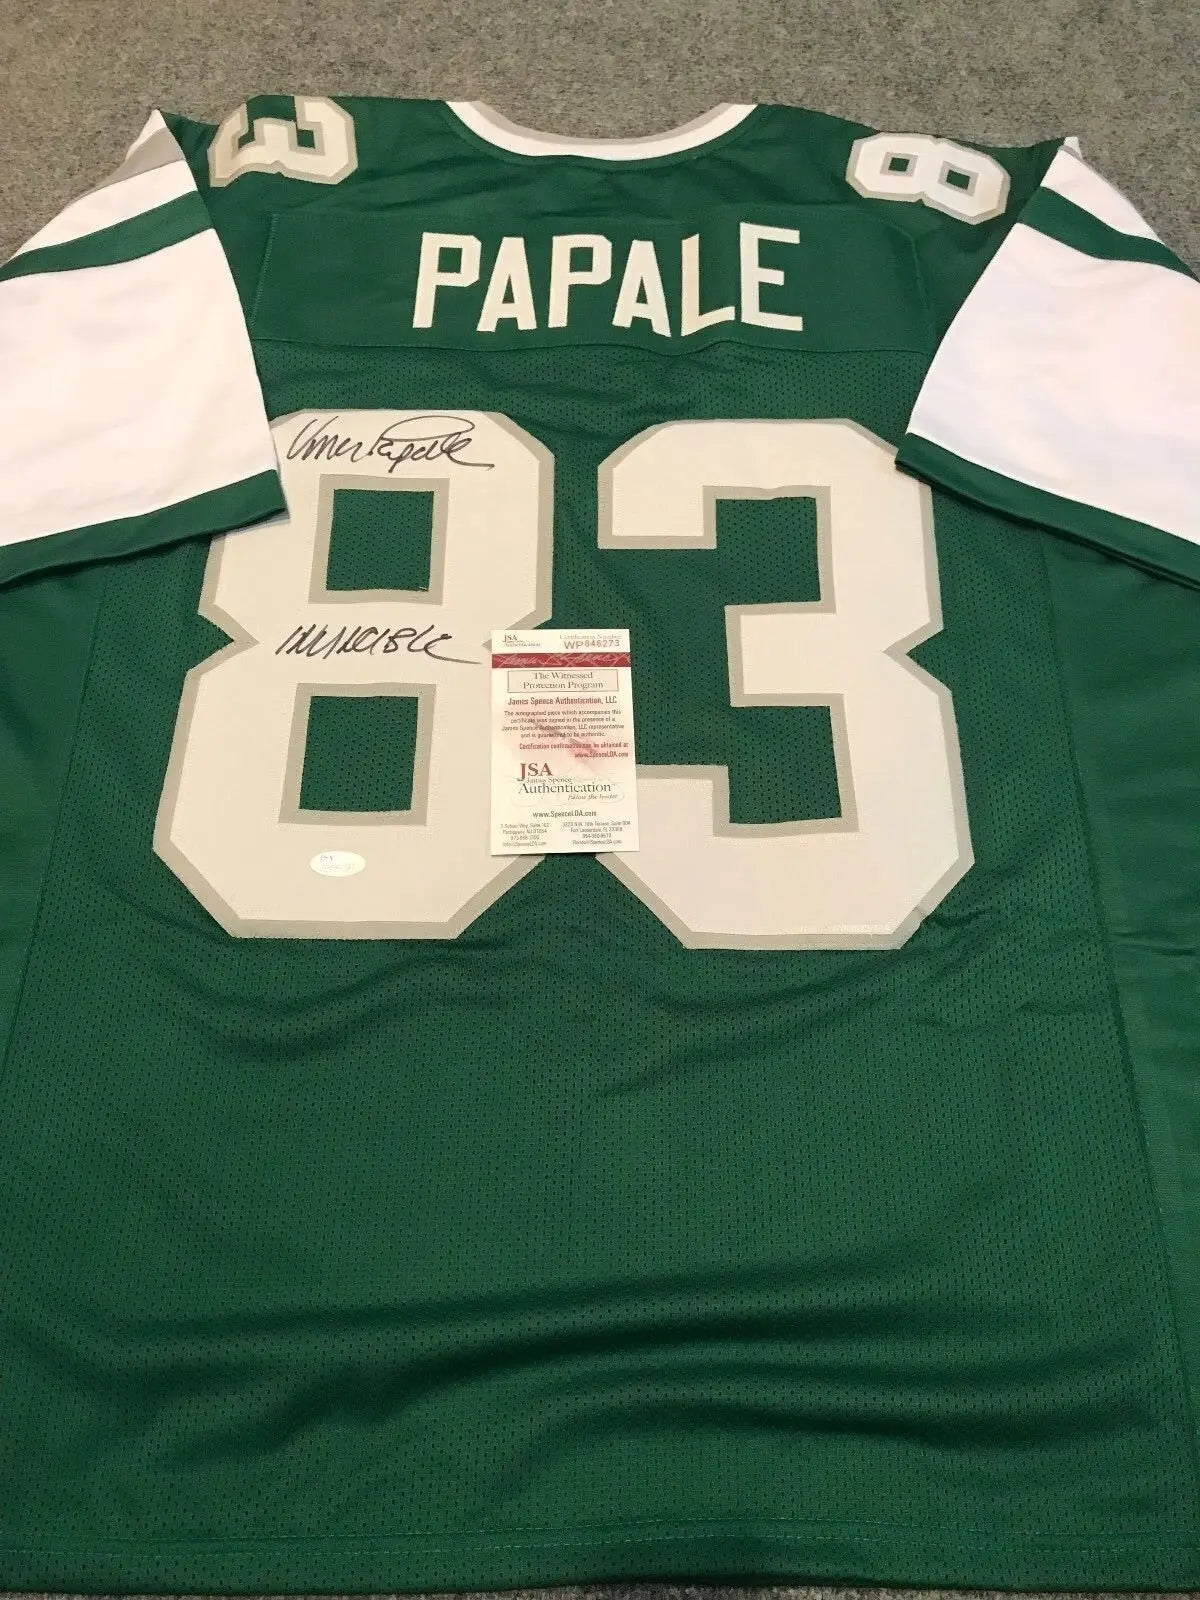 eagles papale jersey